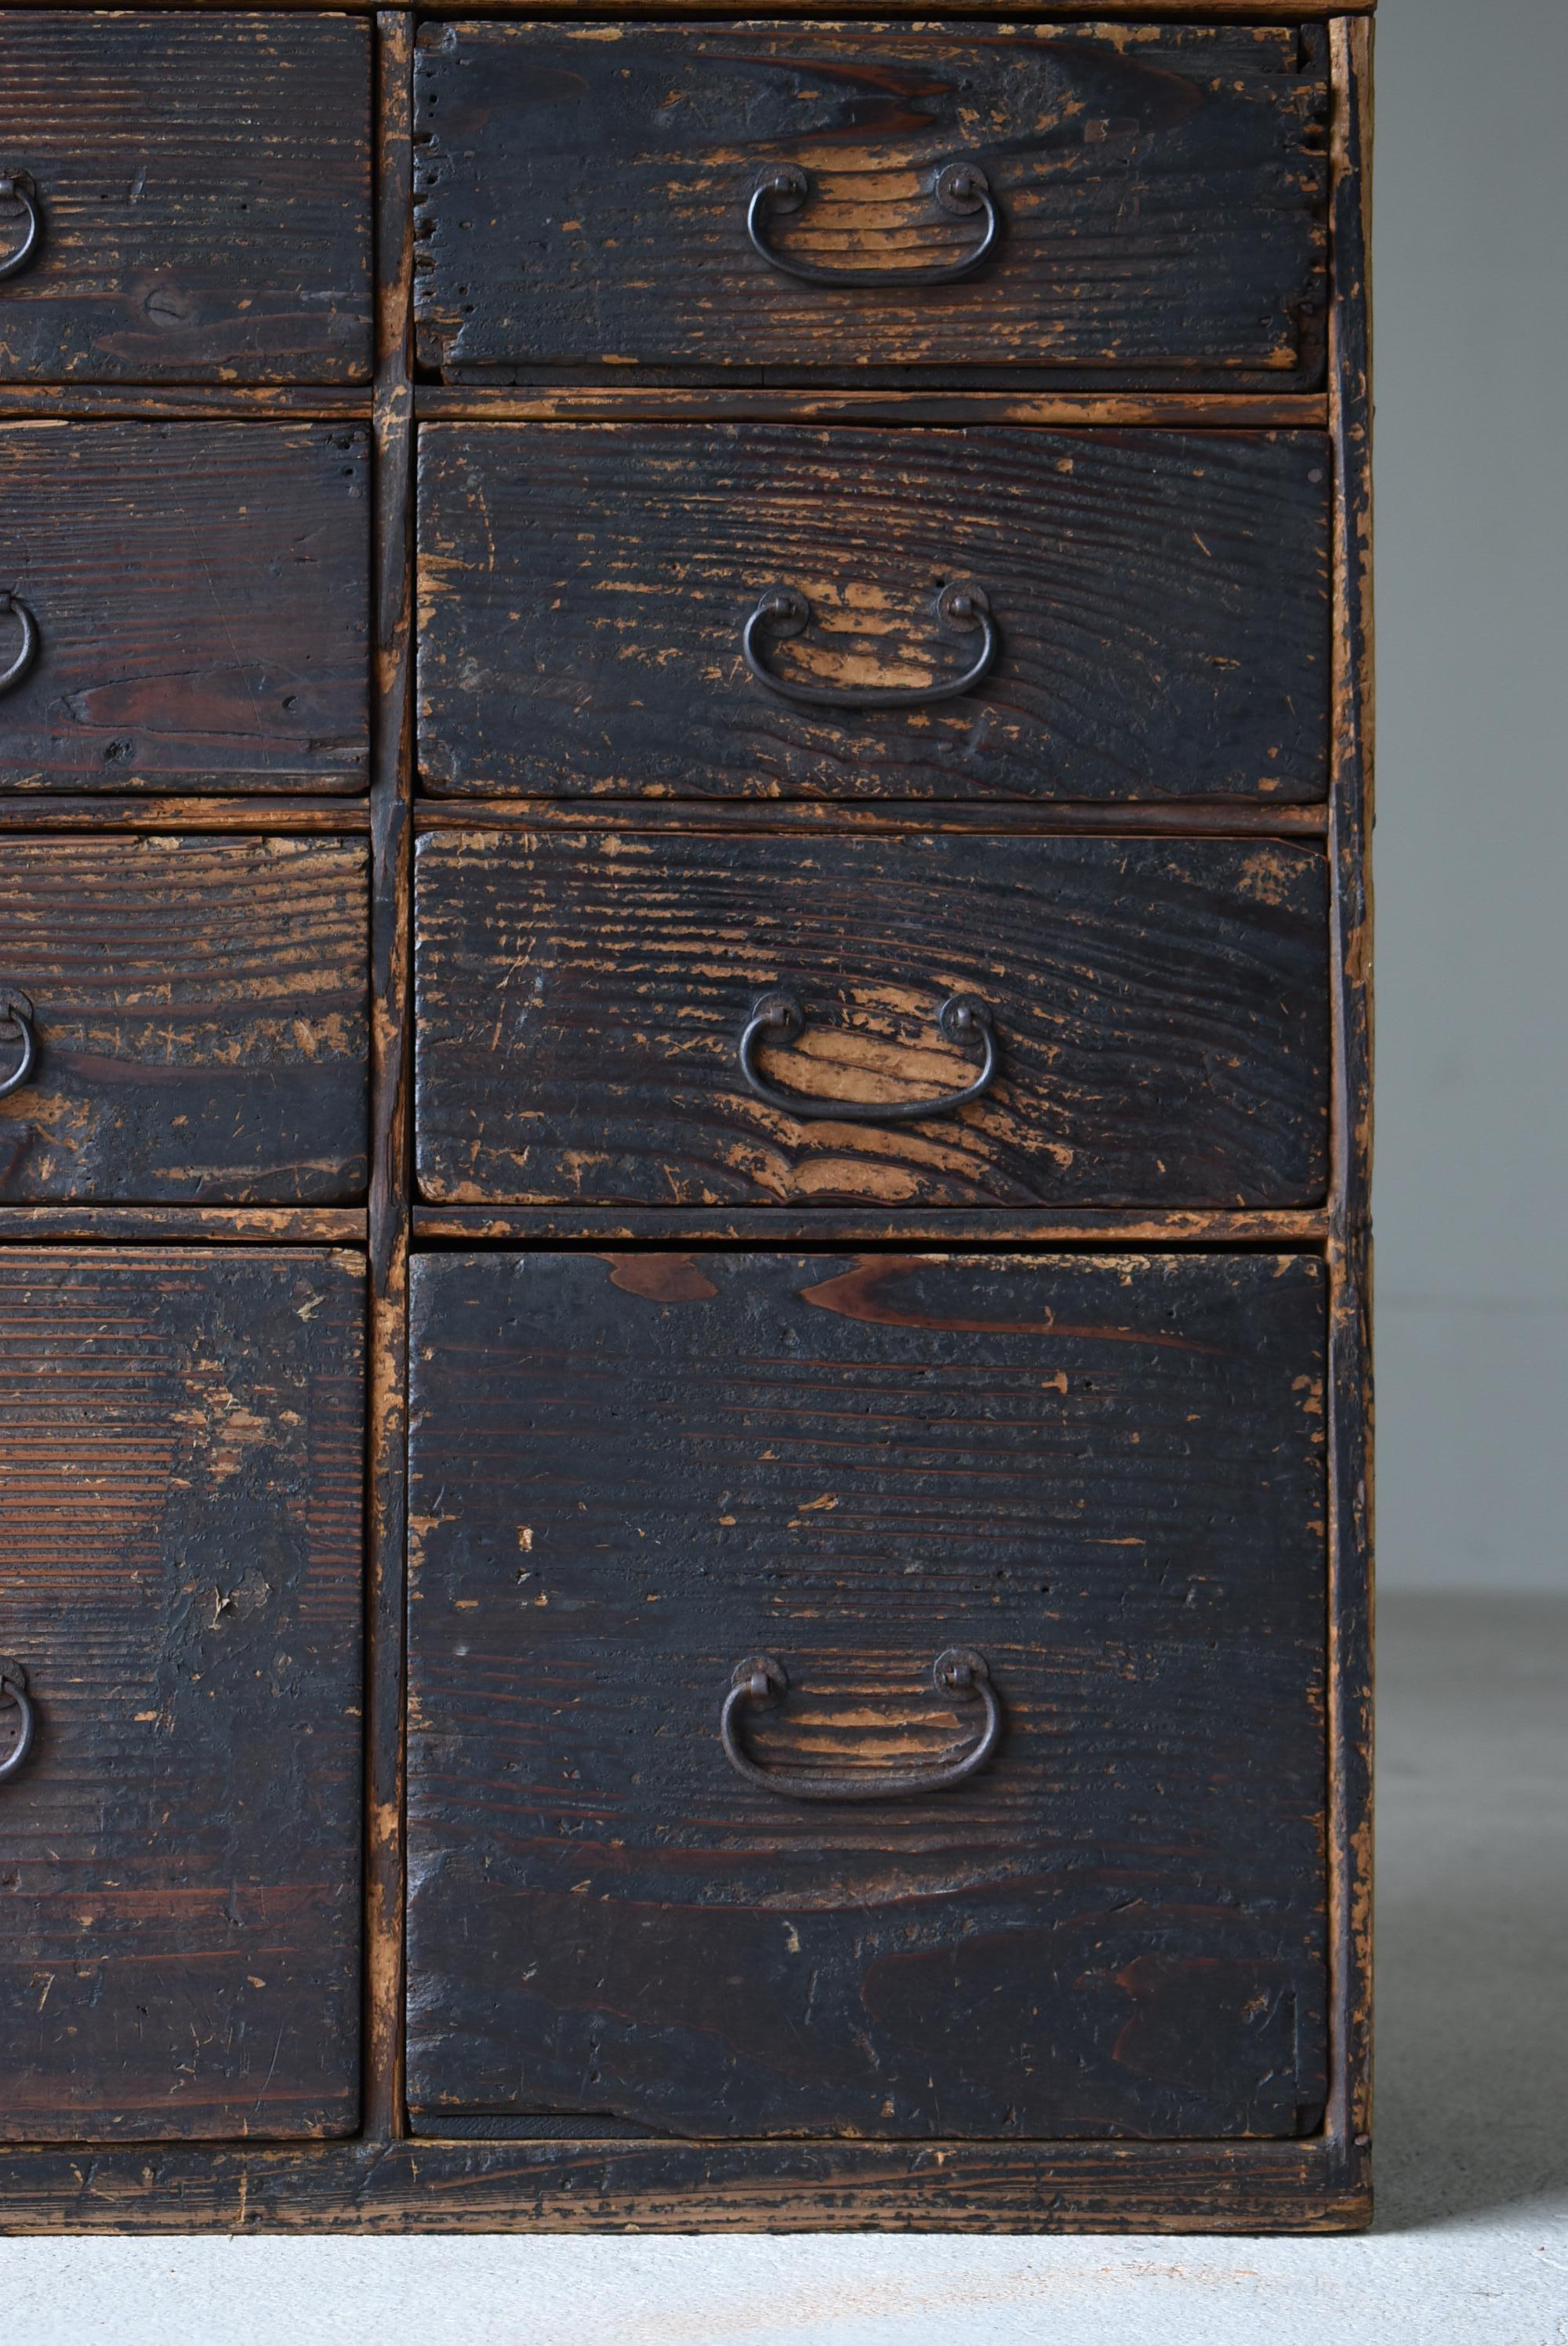 20th Century Japanese Antique Drawer 1860s-1900s/Tansu Chests of Drawers Wabi-Sabi Cabinet